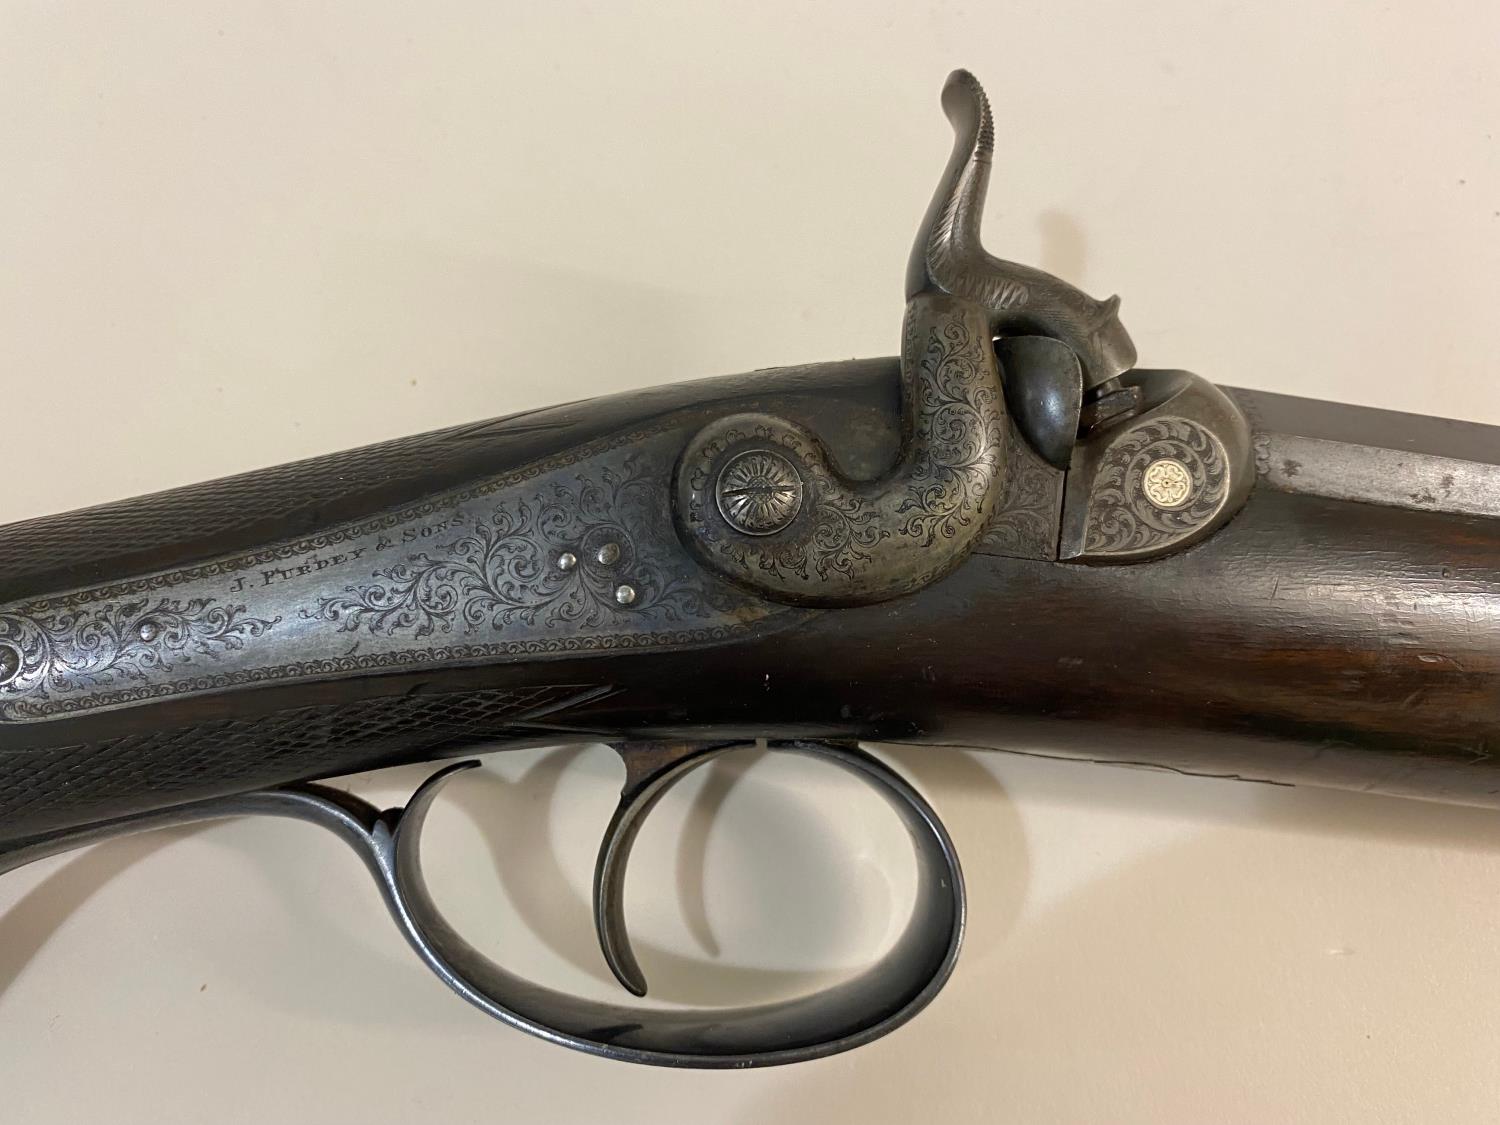 A FINE VICTORIAN SPORTING GUN BY PURDEY OF LONDON. - Image 2 of 11